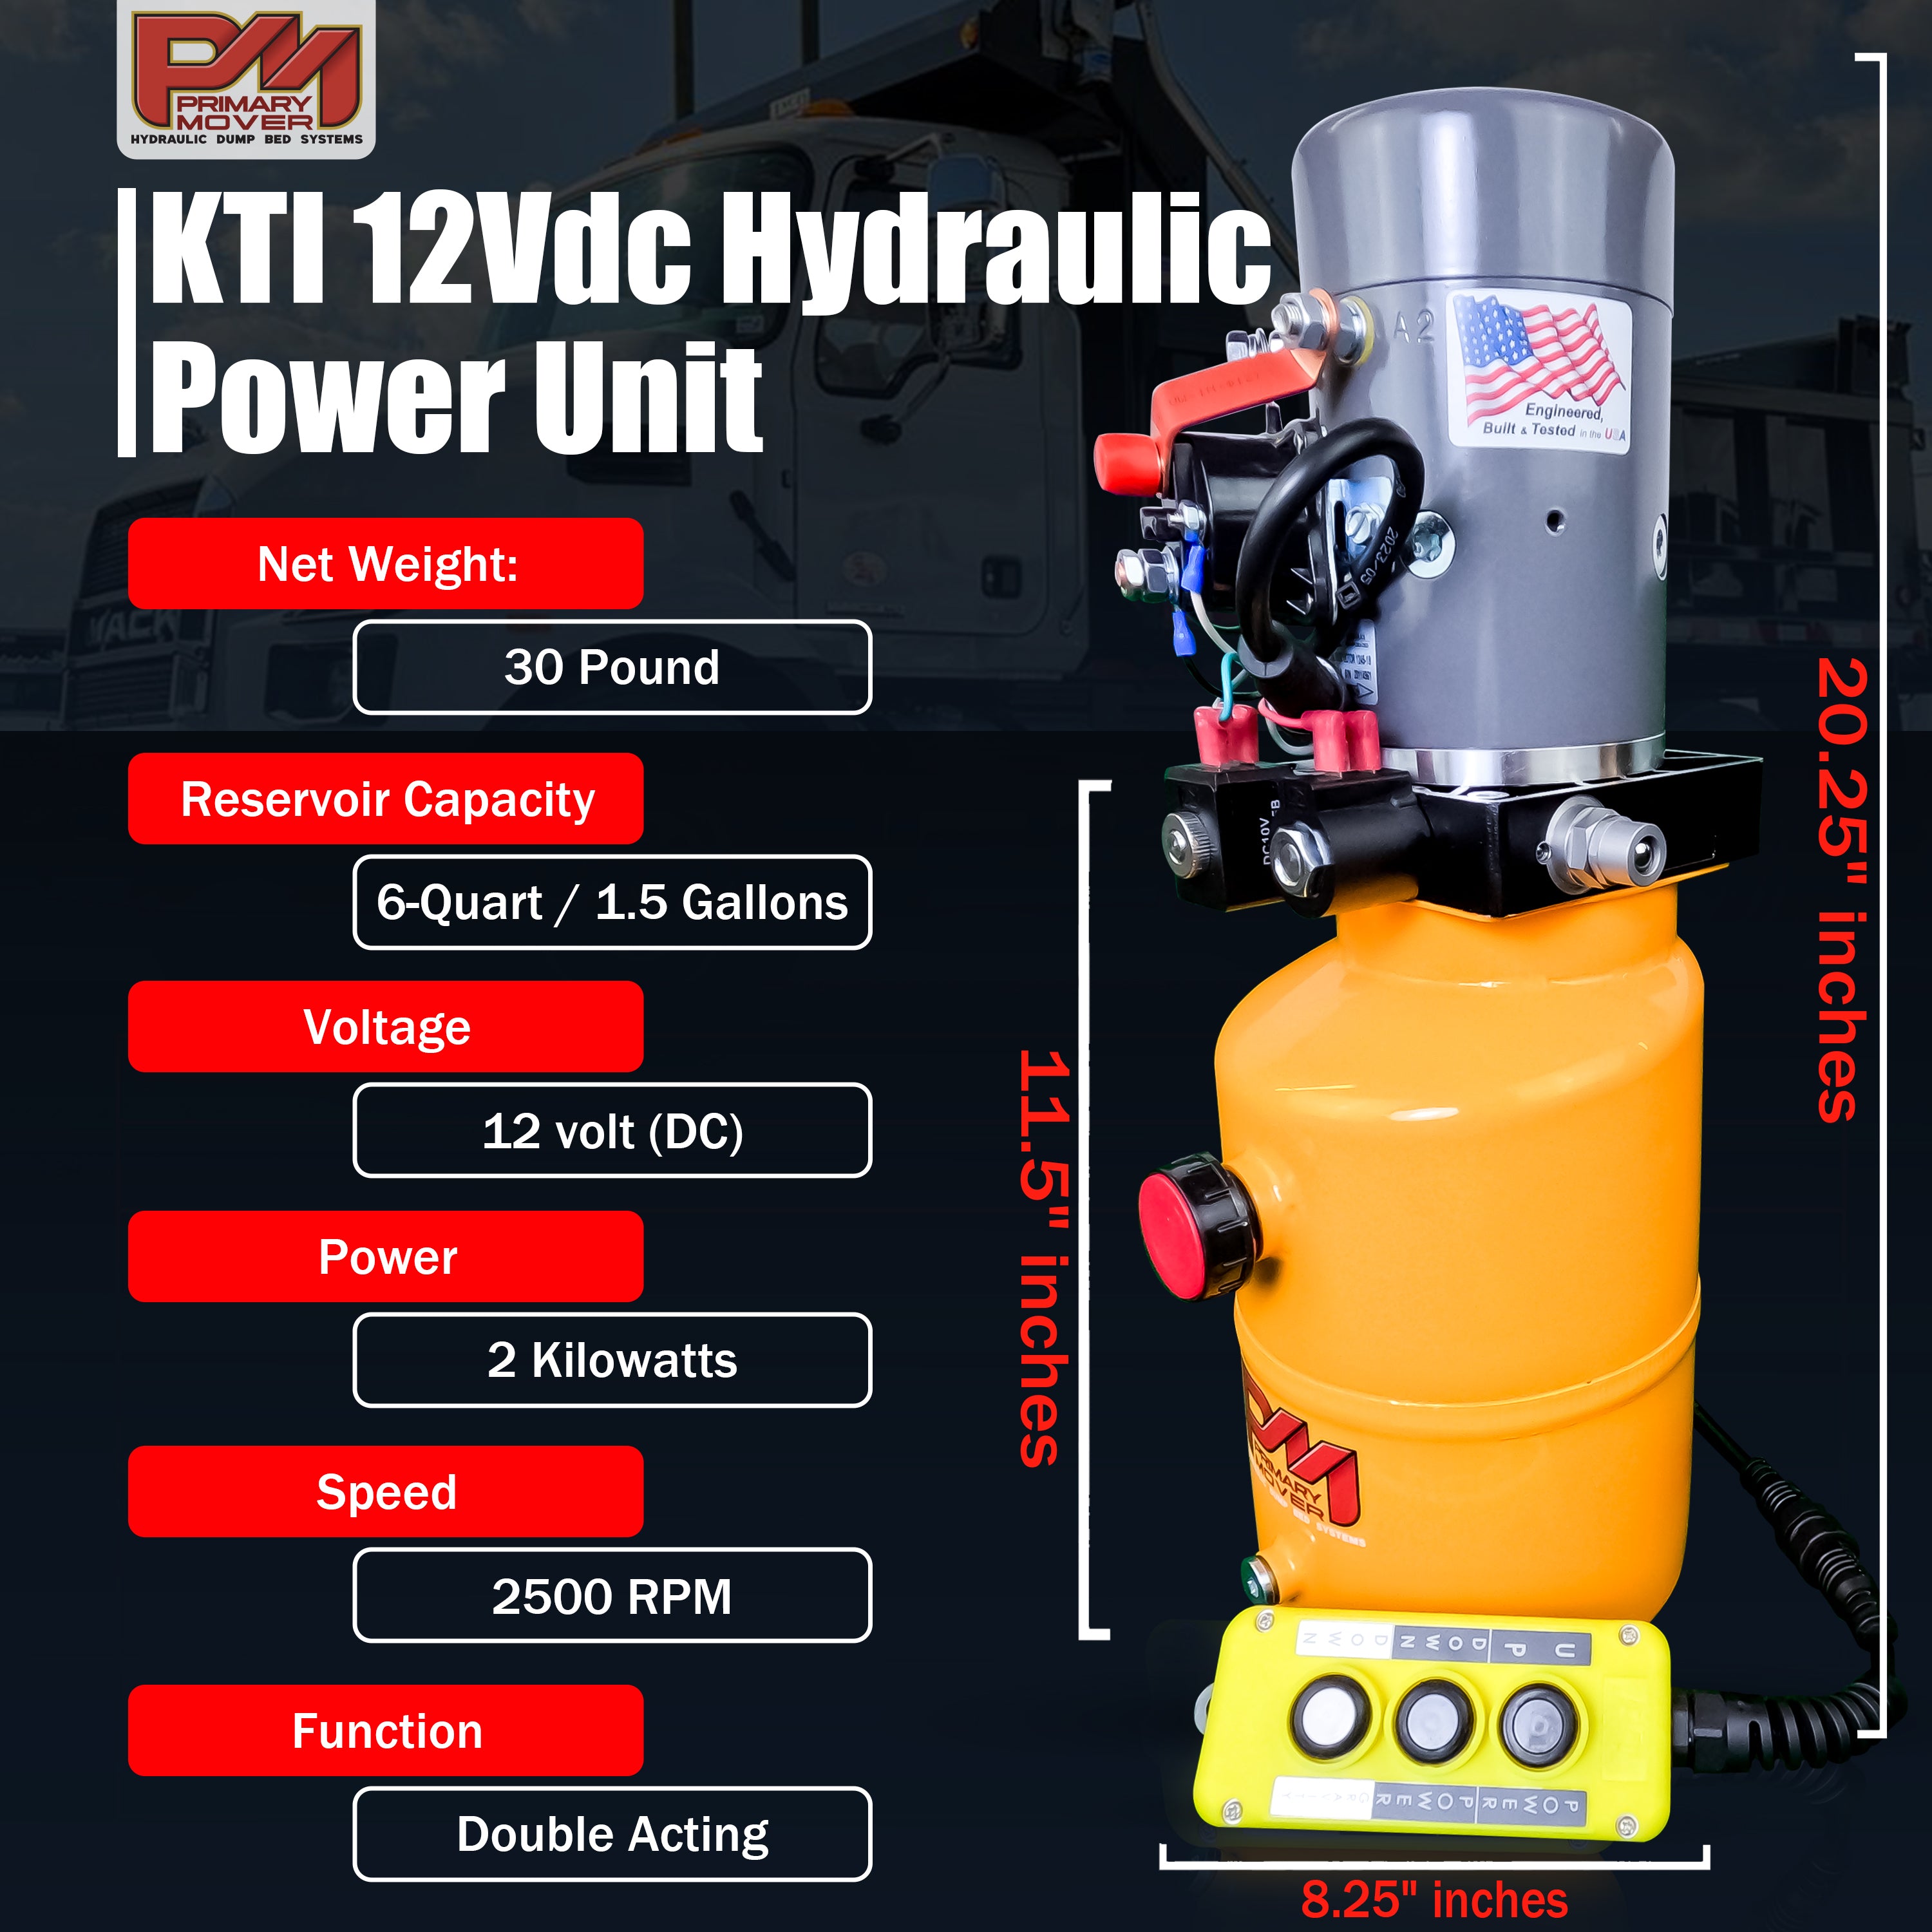 KTI 12V Double-Acting Hydraulic Pump - Steel Reservoir with red and black buttons and a rugged, compact design for heavy-duty hydraulic dump bed systems.